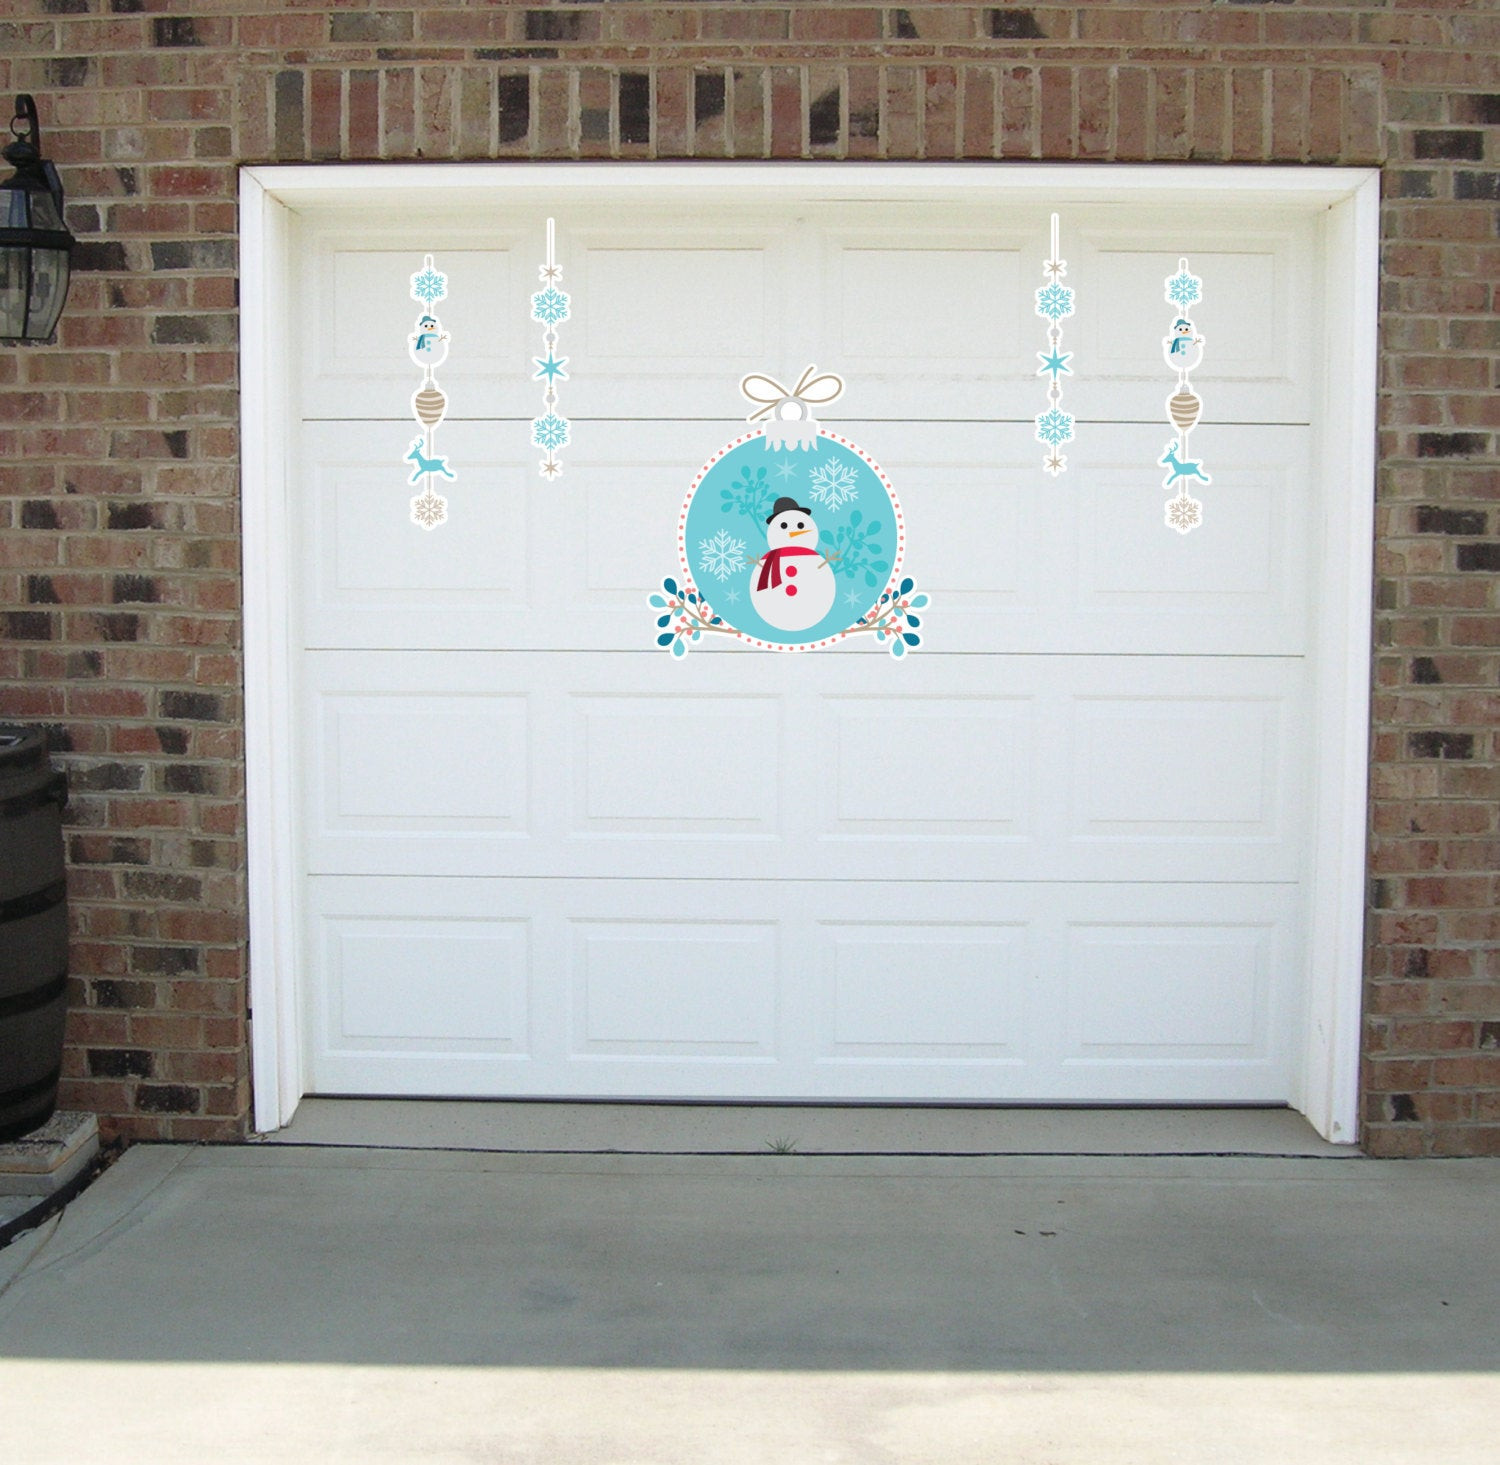 Garage Door Magnets
 Decorate your garage with Christmas magnets Christmas garage